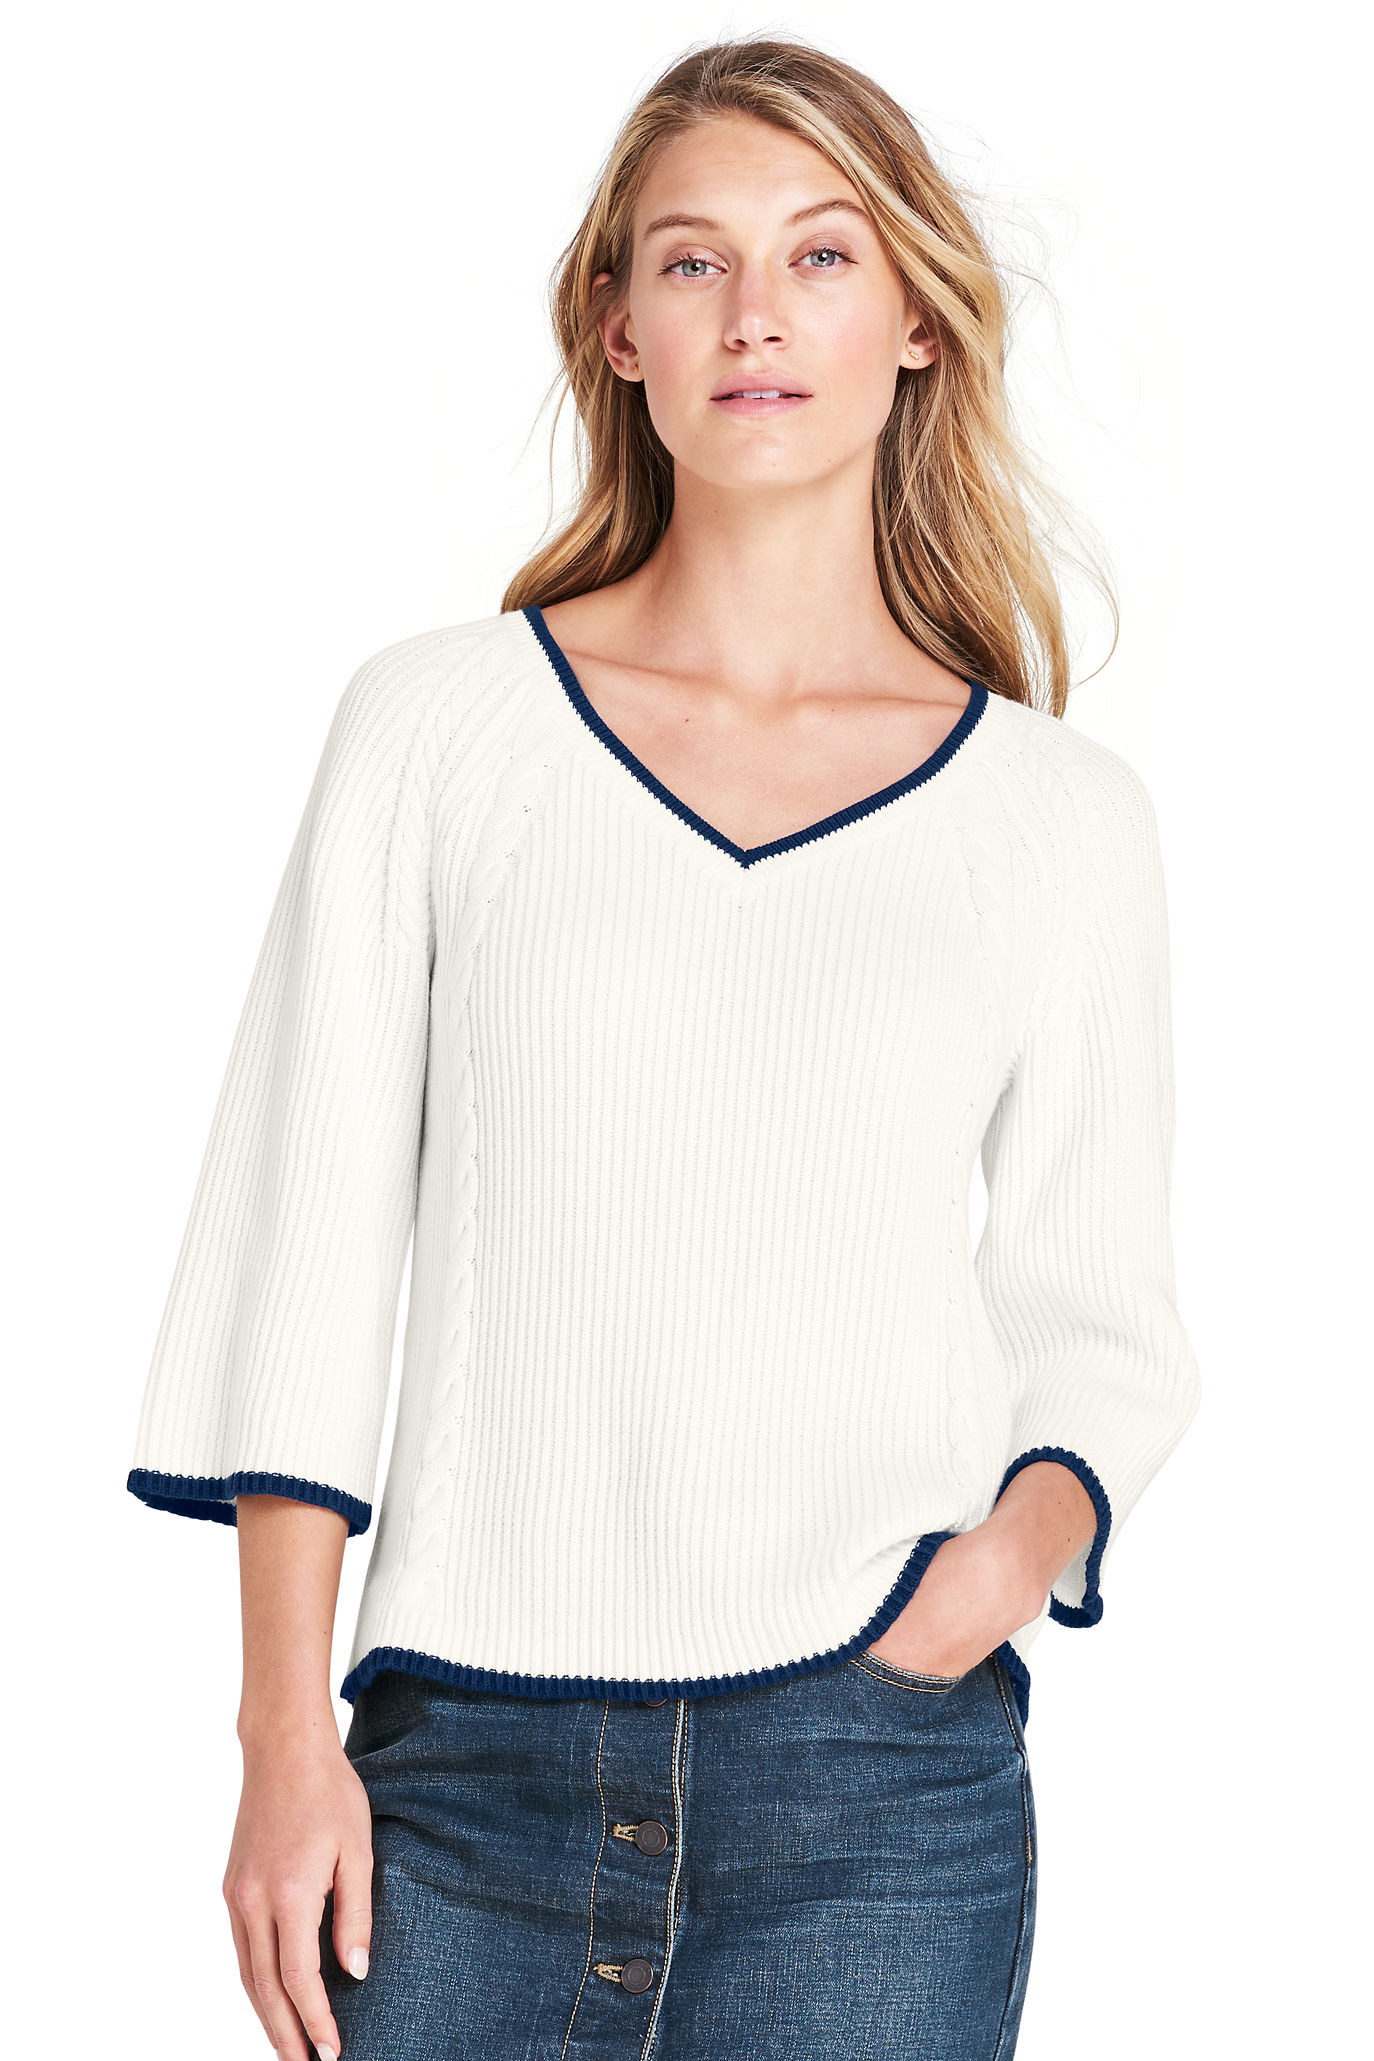 Women's Combed Cotton 3/4 Sleeve V-Neck Sweater